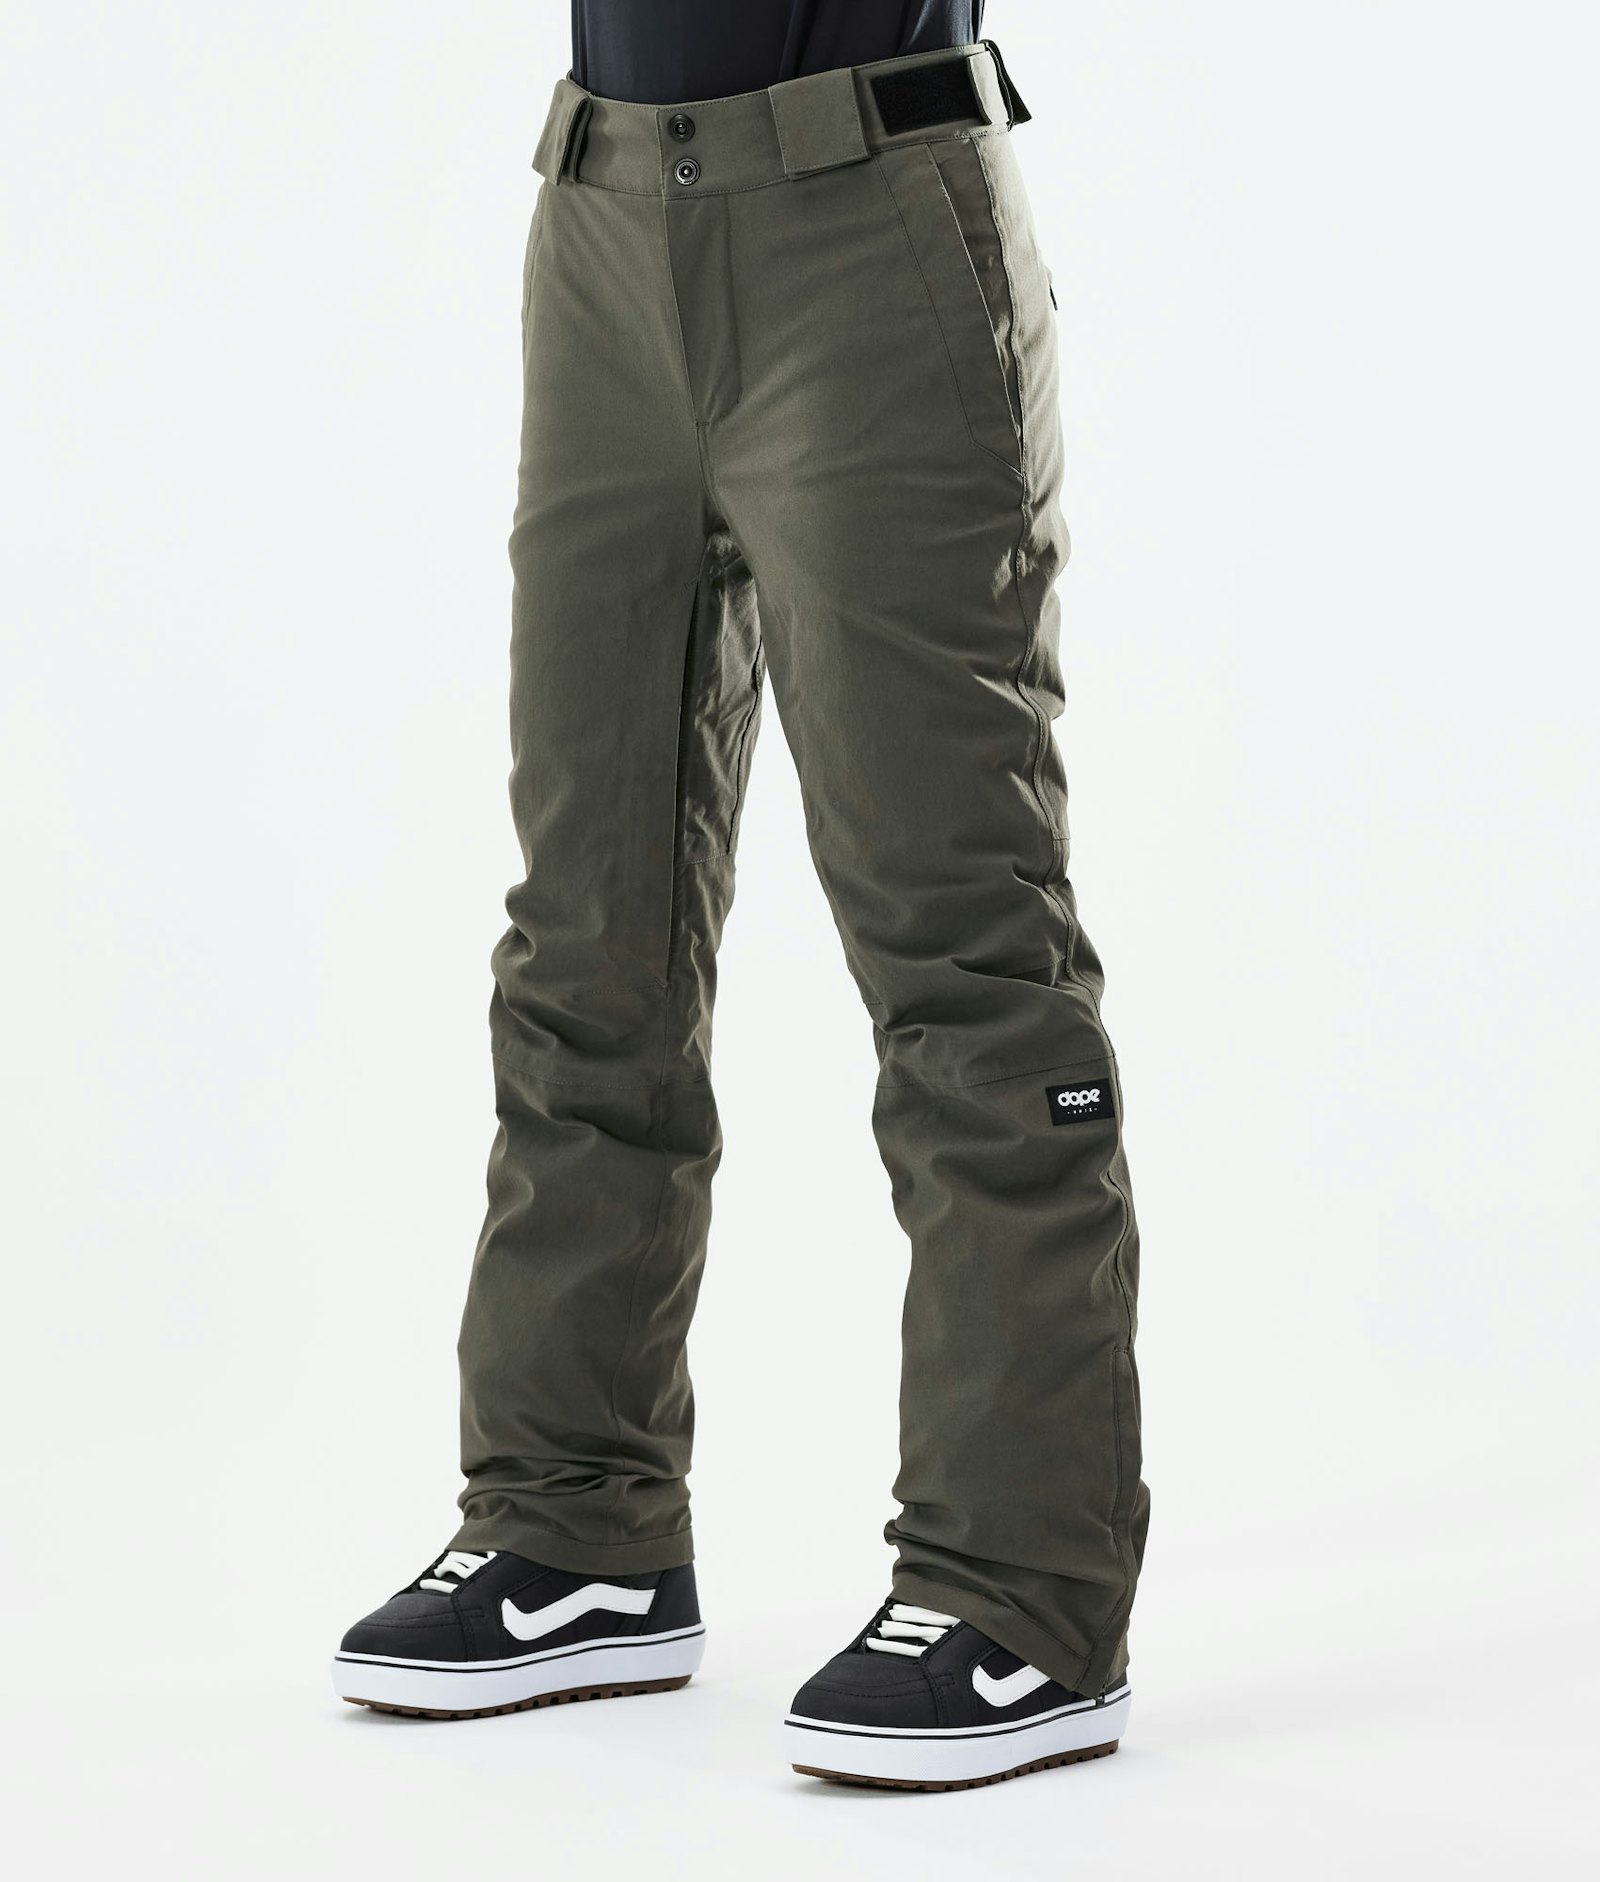 Dope Con W 2021 Snowboard Pants Women Olive Green Renewed, Image 1 of 5